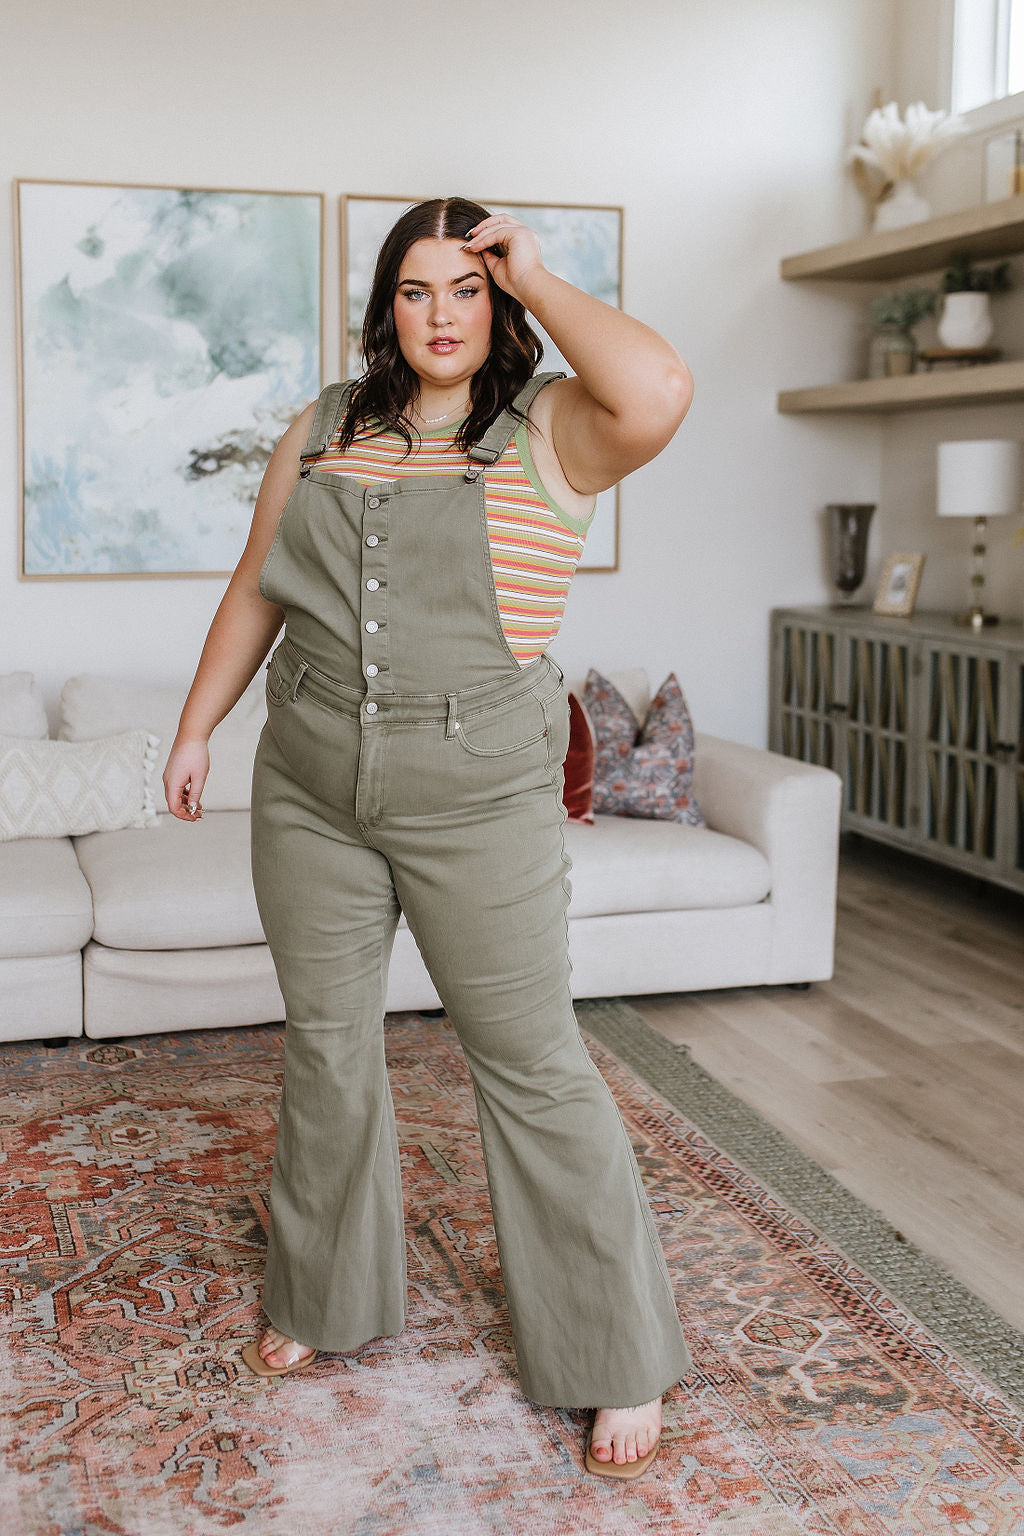 Olivia Control Top Release Hem Overalls in Olive - God's Girl Gifts And Apparel